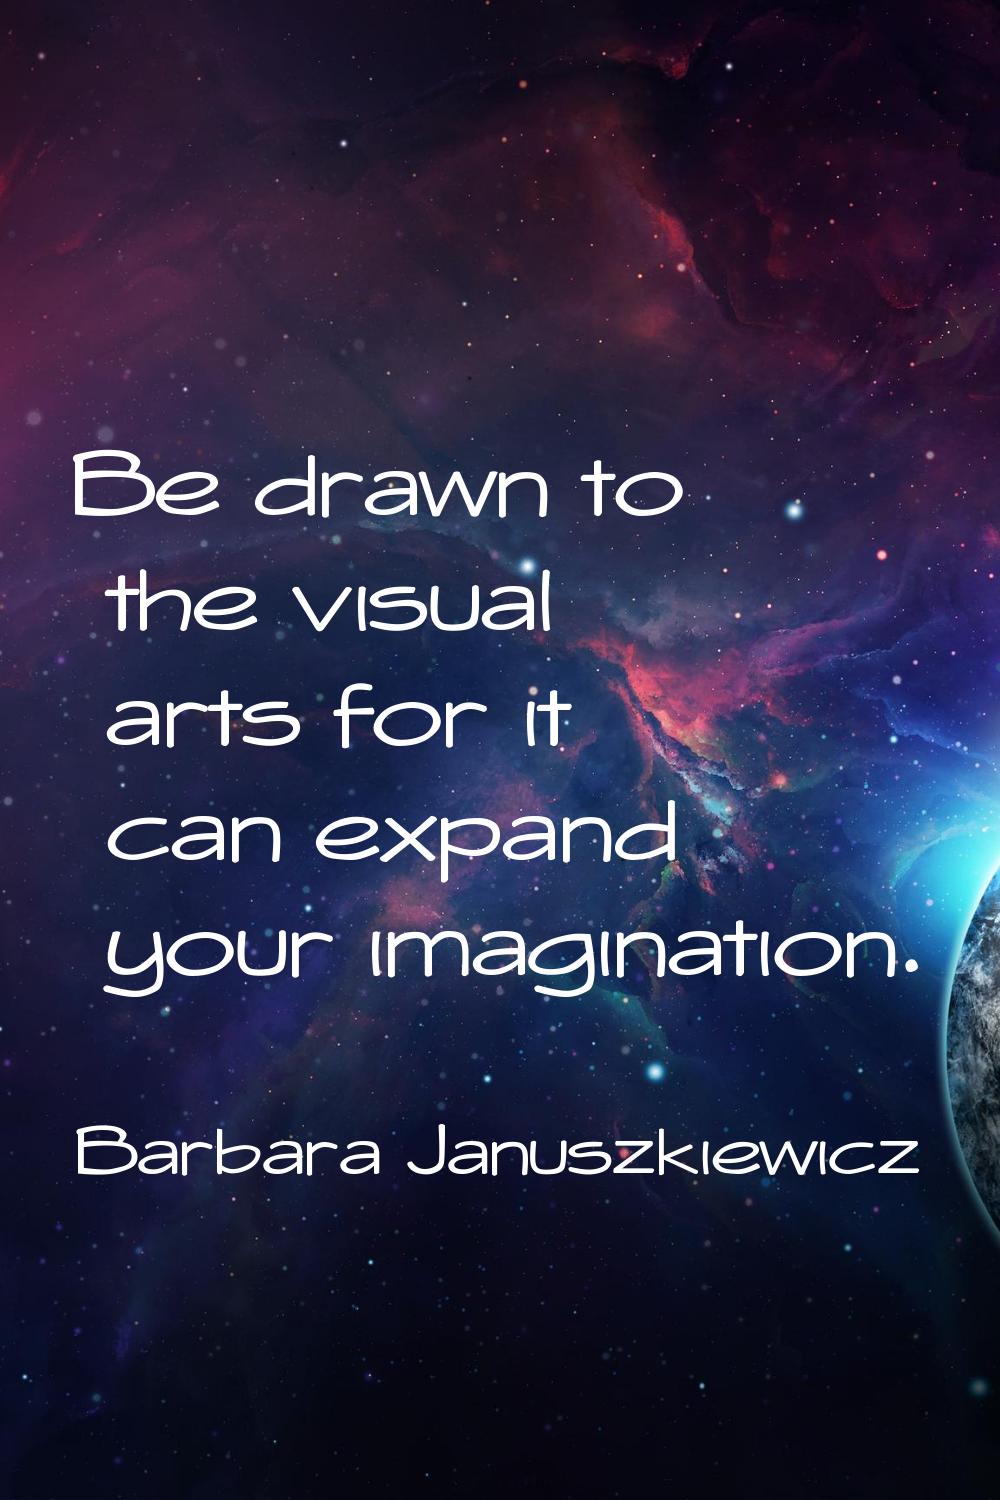 Be drawn to the visual arts for it can expand your imagination.